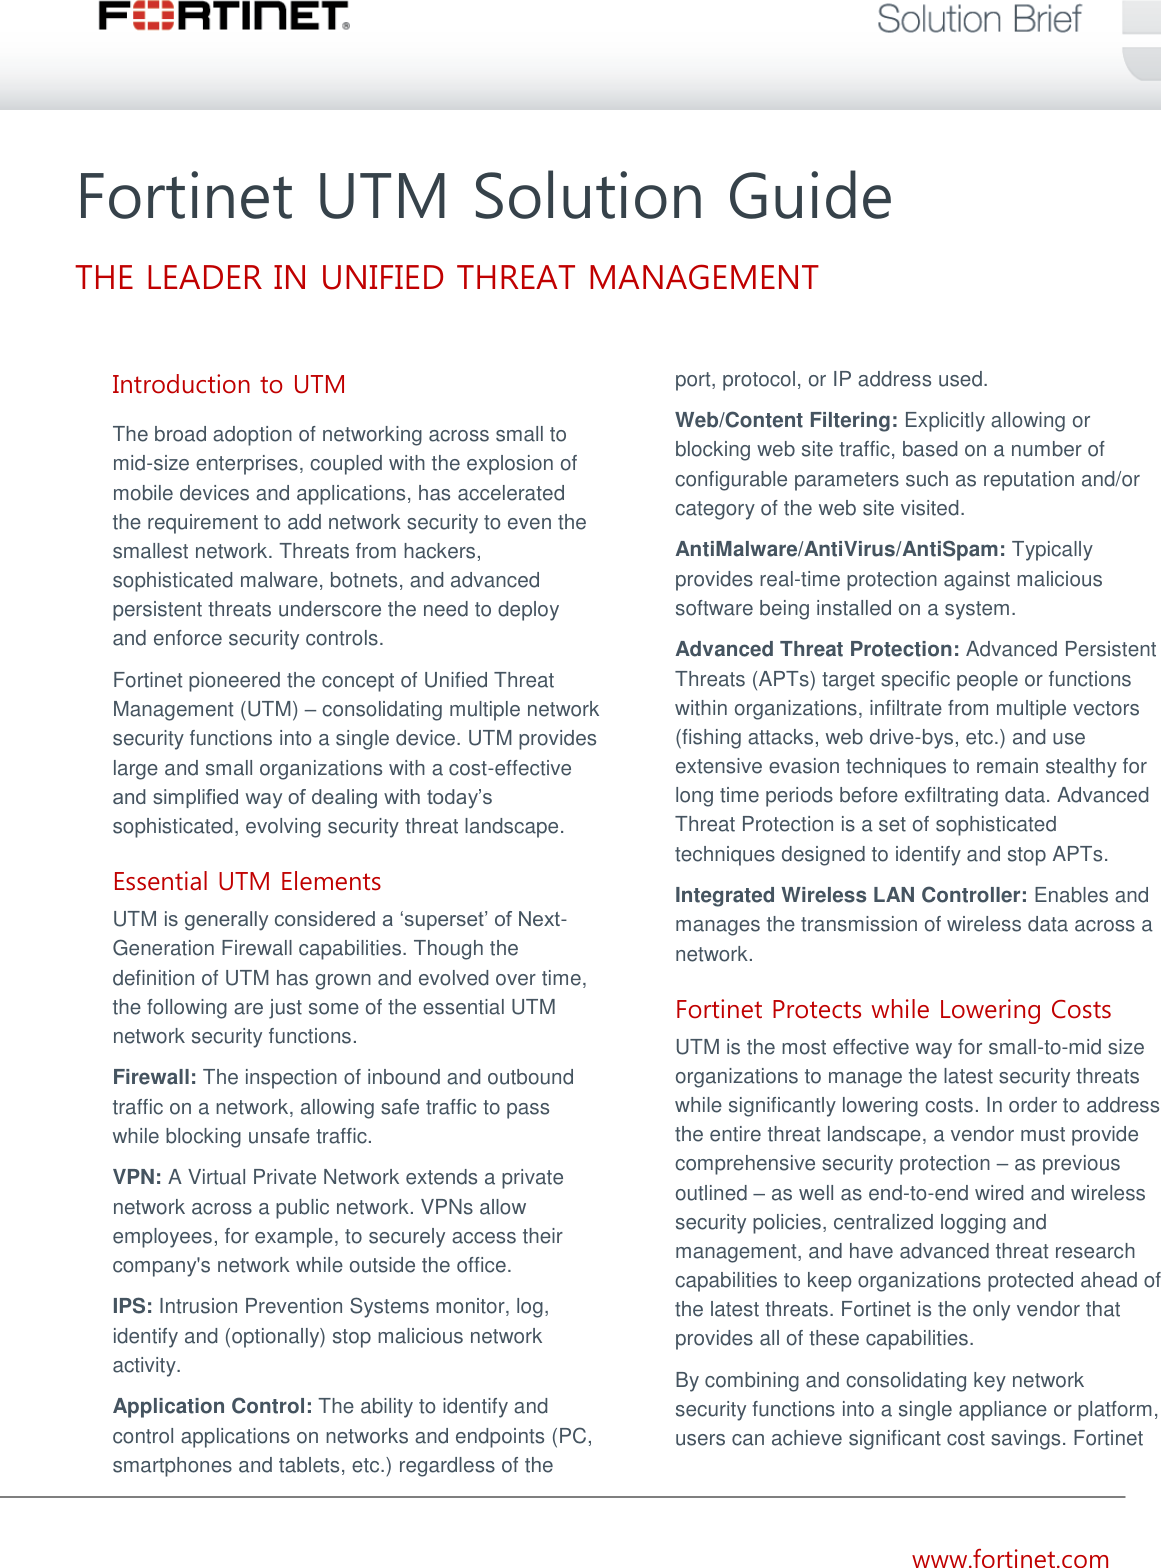 Page 1 of 3 - Fortinet Case Study  UTMSolution Brief